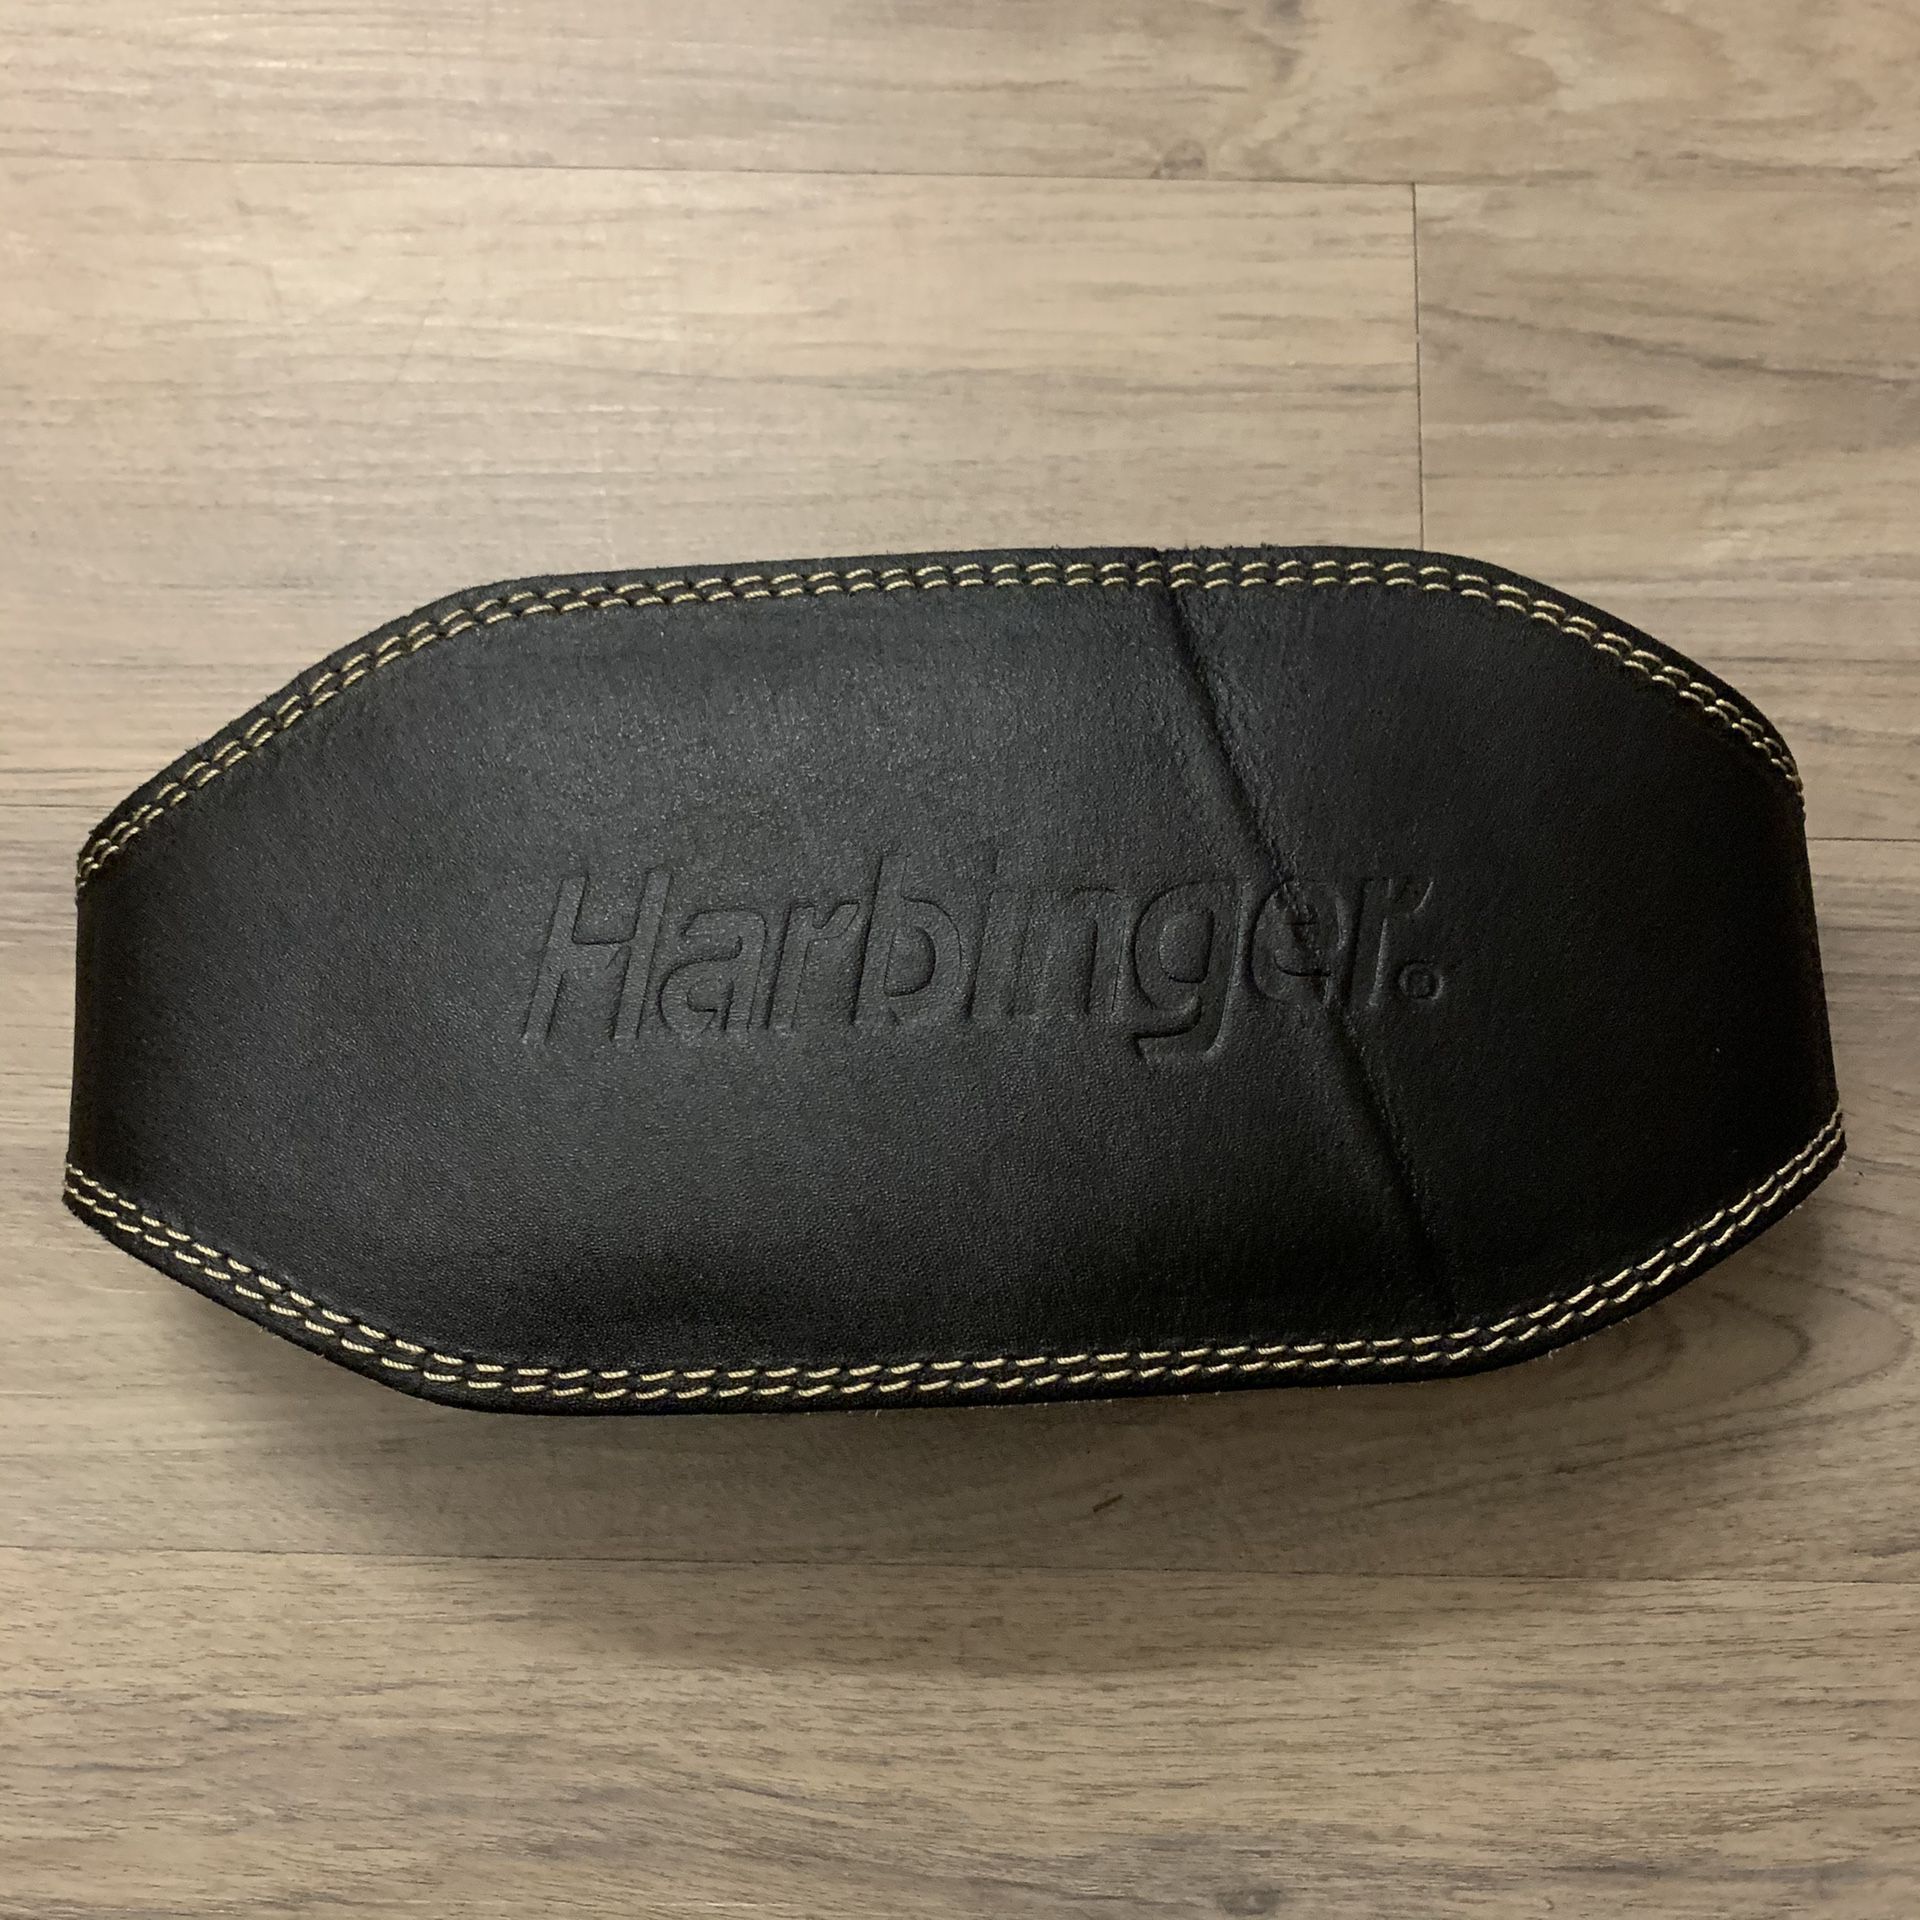 NEW Harbinger Weight Lifting Belt Size Small